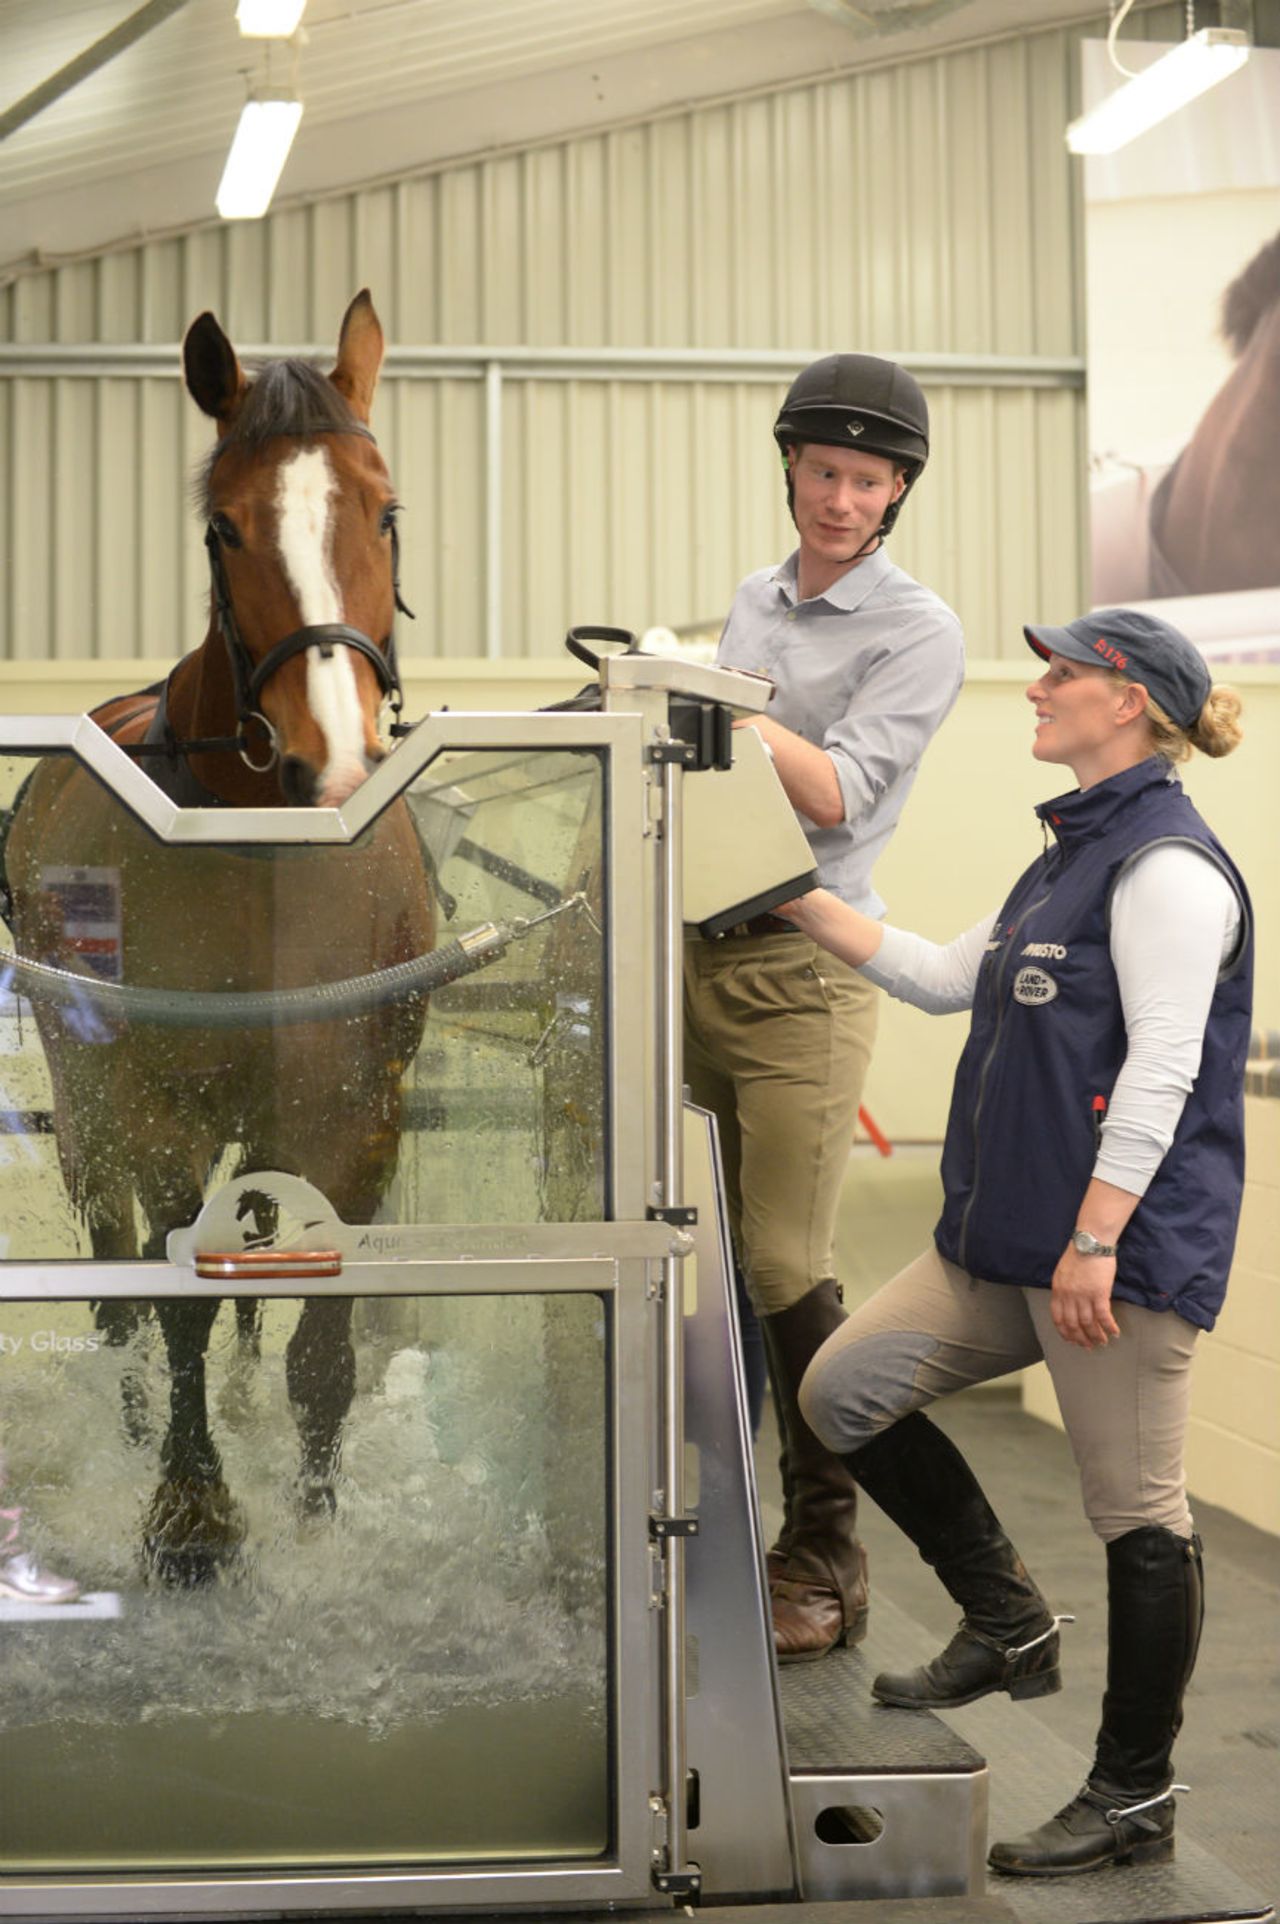 Zara Phillips, a member of British royalty preparing to compete at this year's World Equestrian Games, inspects an equine treadmill at Warwickshire College in the UK.